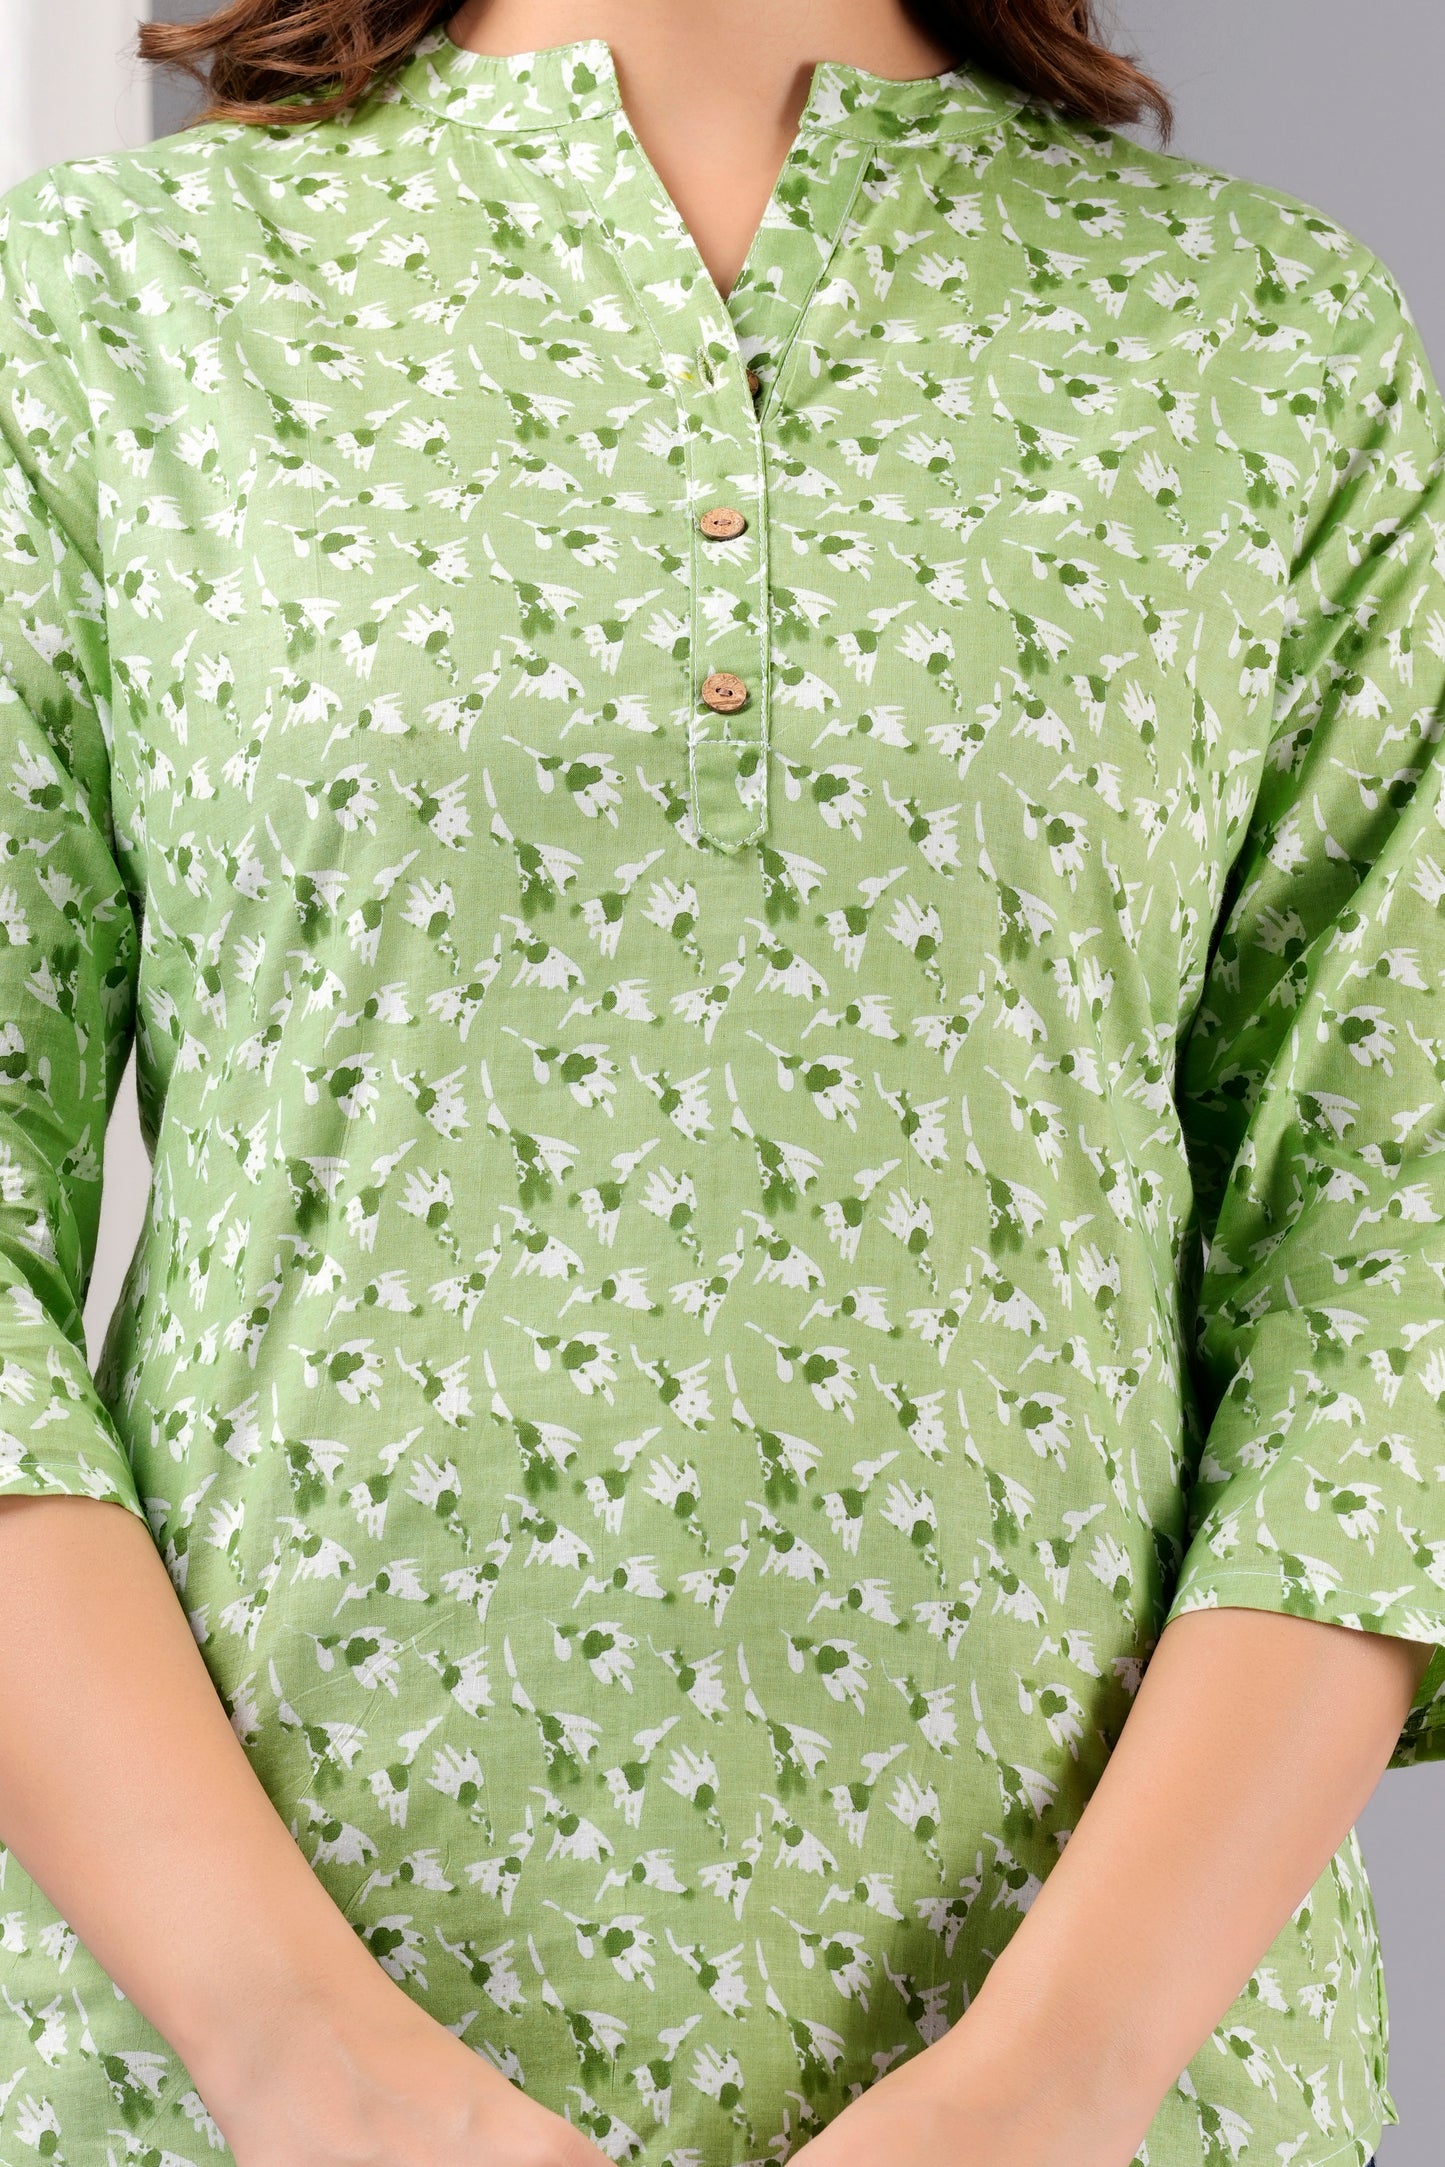 Zesty Geometrical Printed 3/4 Sleeve Ladies Cotton Green Top for Women